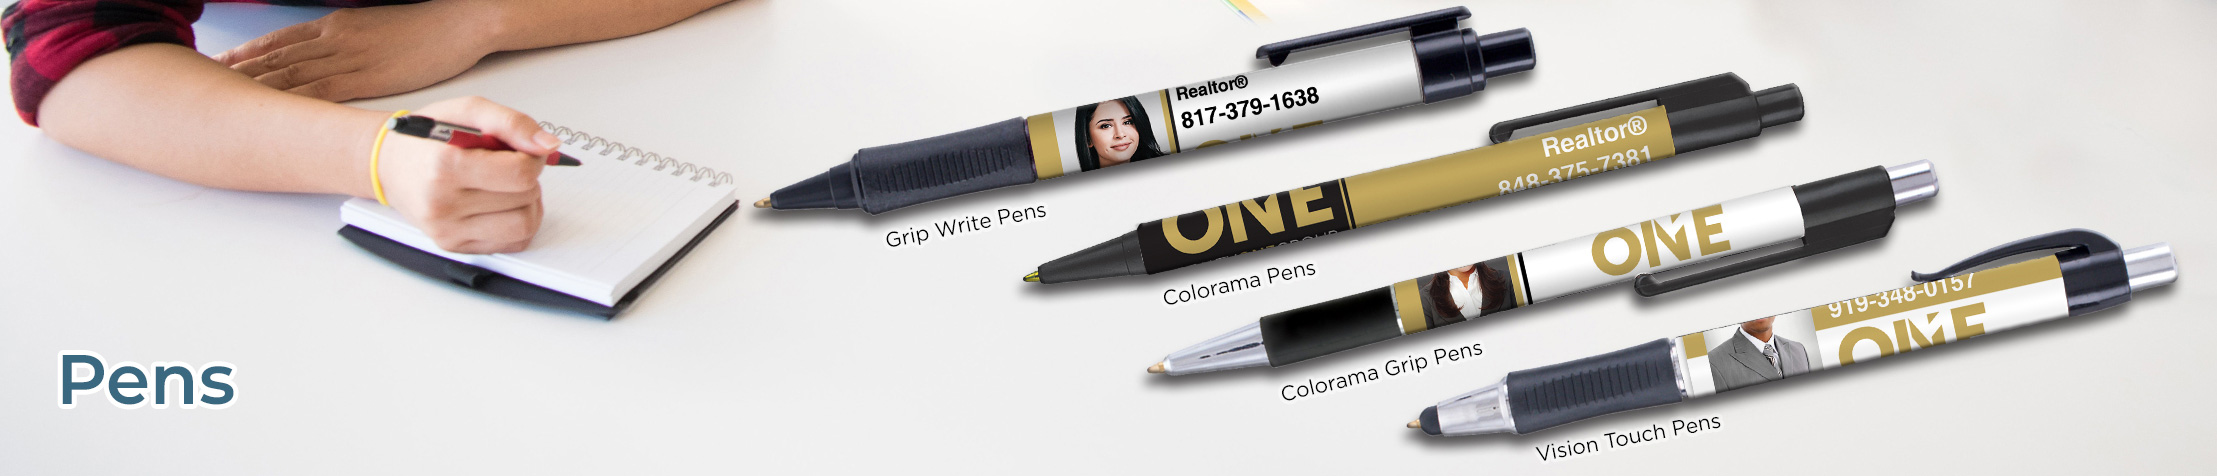 Realty ONE Group Real Estate Personalized Pens - promotional products: Grip Write Pens, Colorama Pens, Vision Touch Pens, and Colorama Grip Pens | BestPrintBuy.com